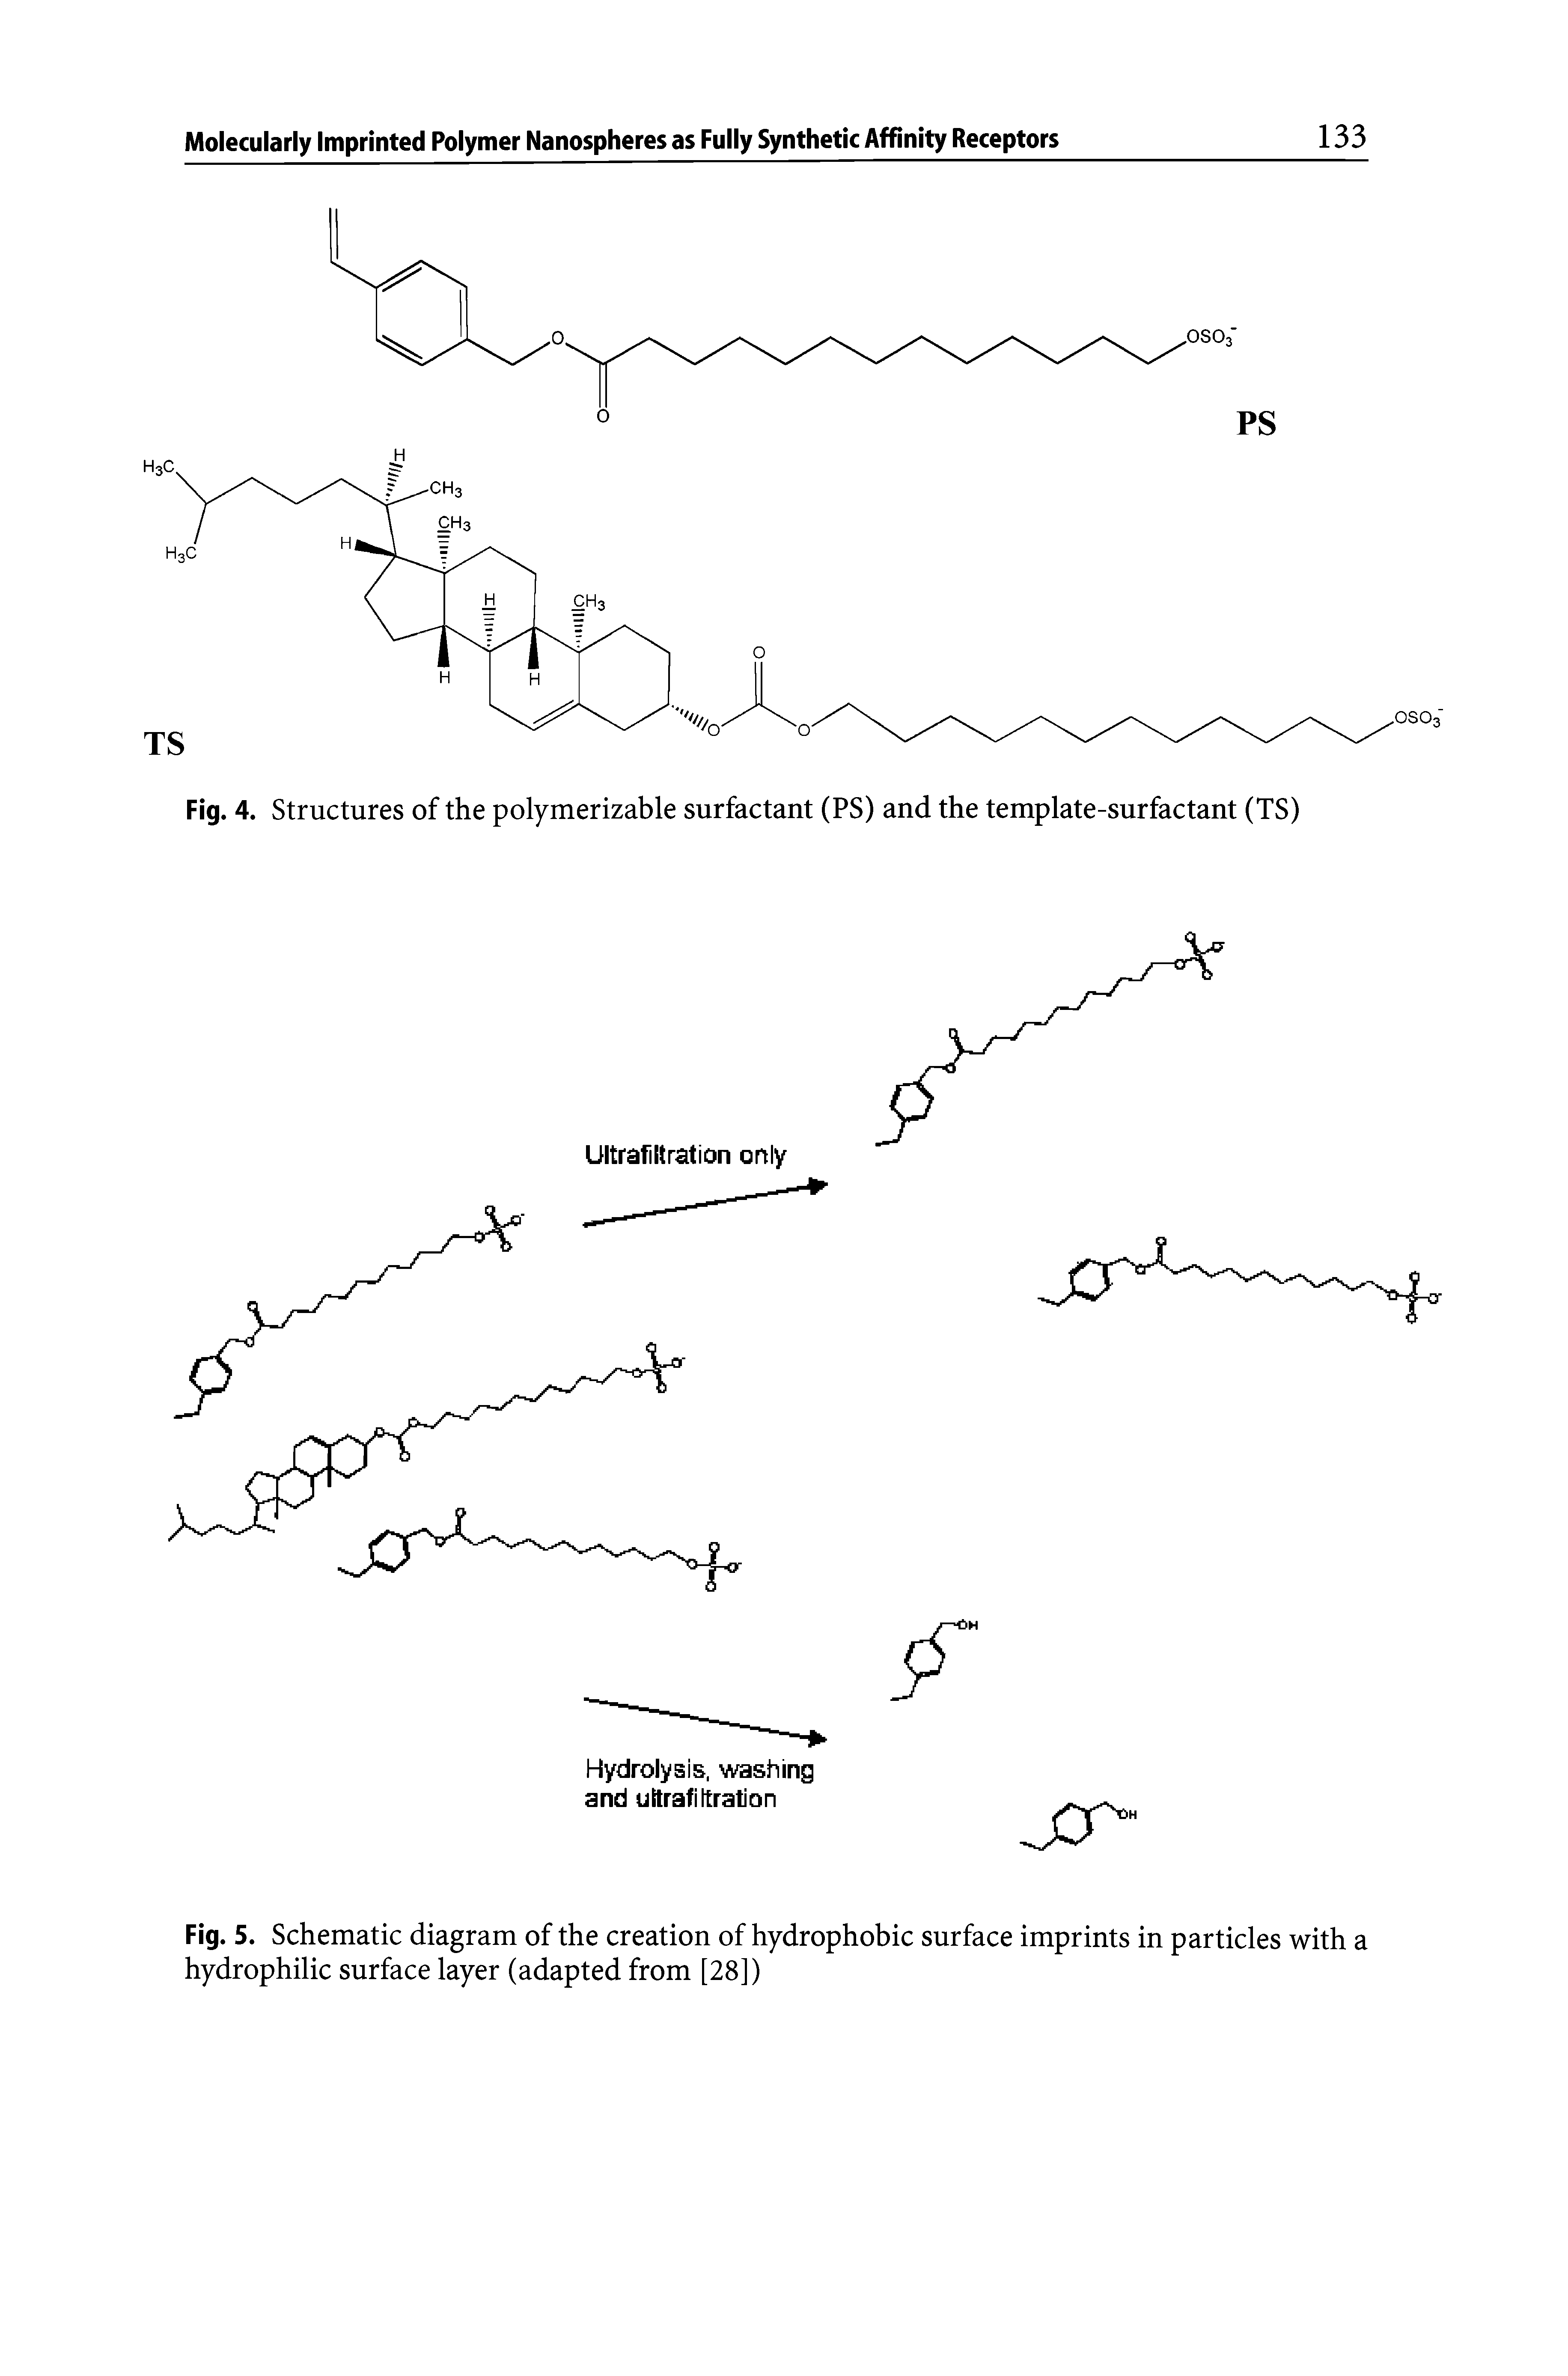 Fig. 5. Schematic diagram of the creation of hydrophobic surface imprints in particles with a hydrophilic surface layer (adapted from [28])...